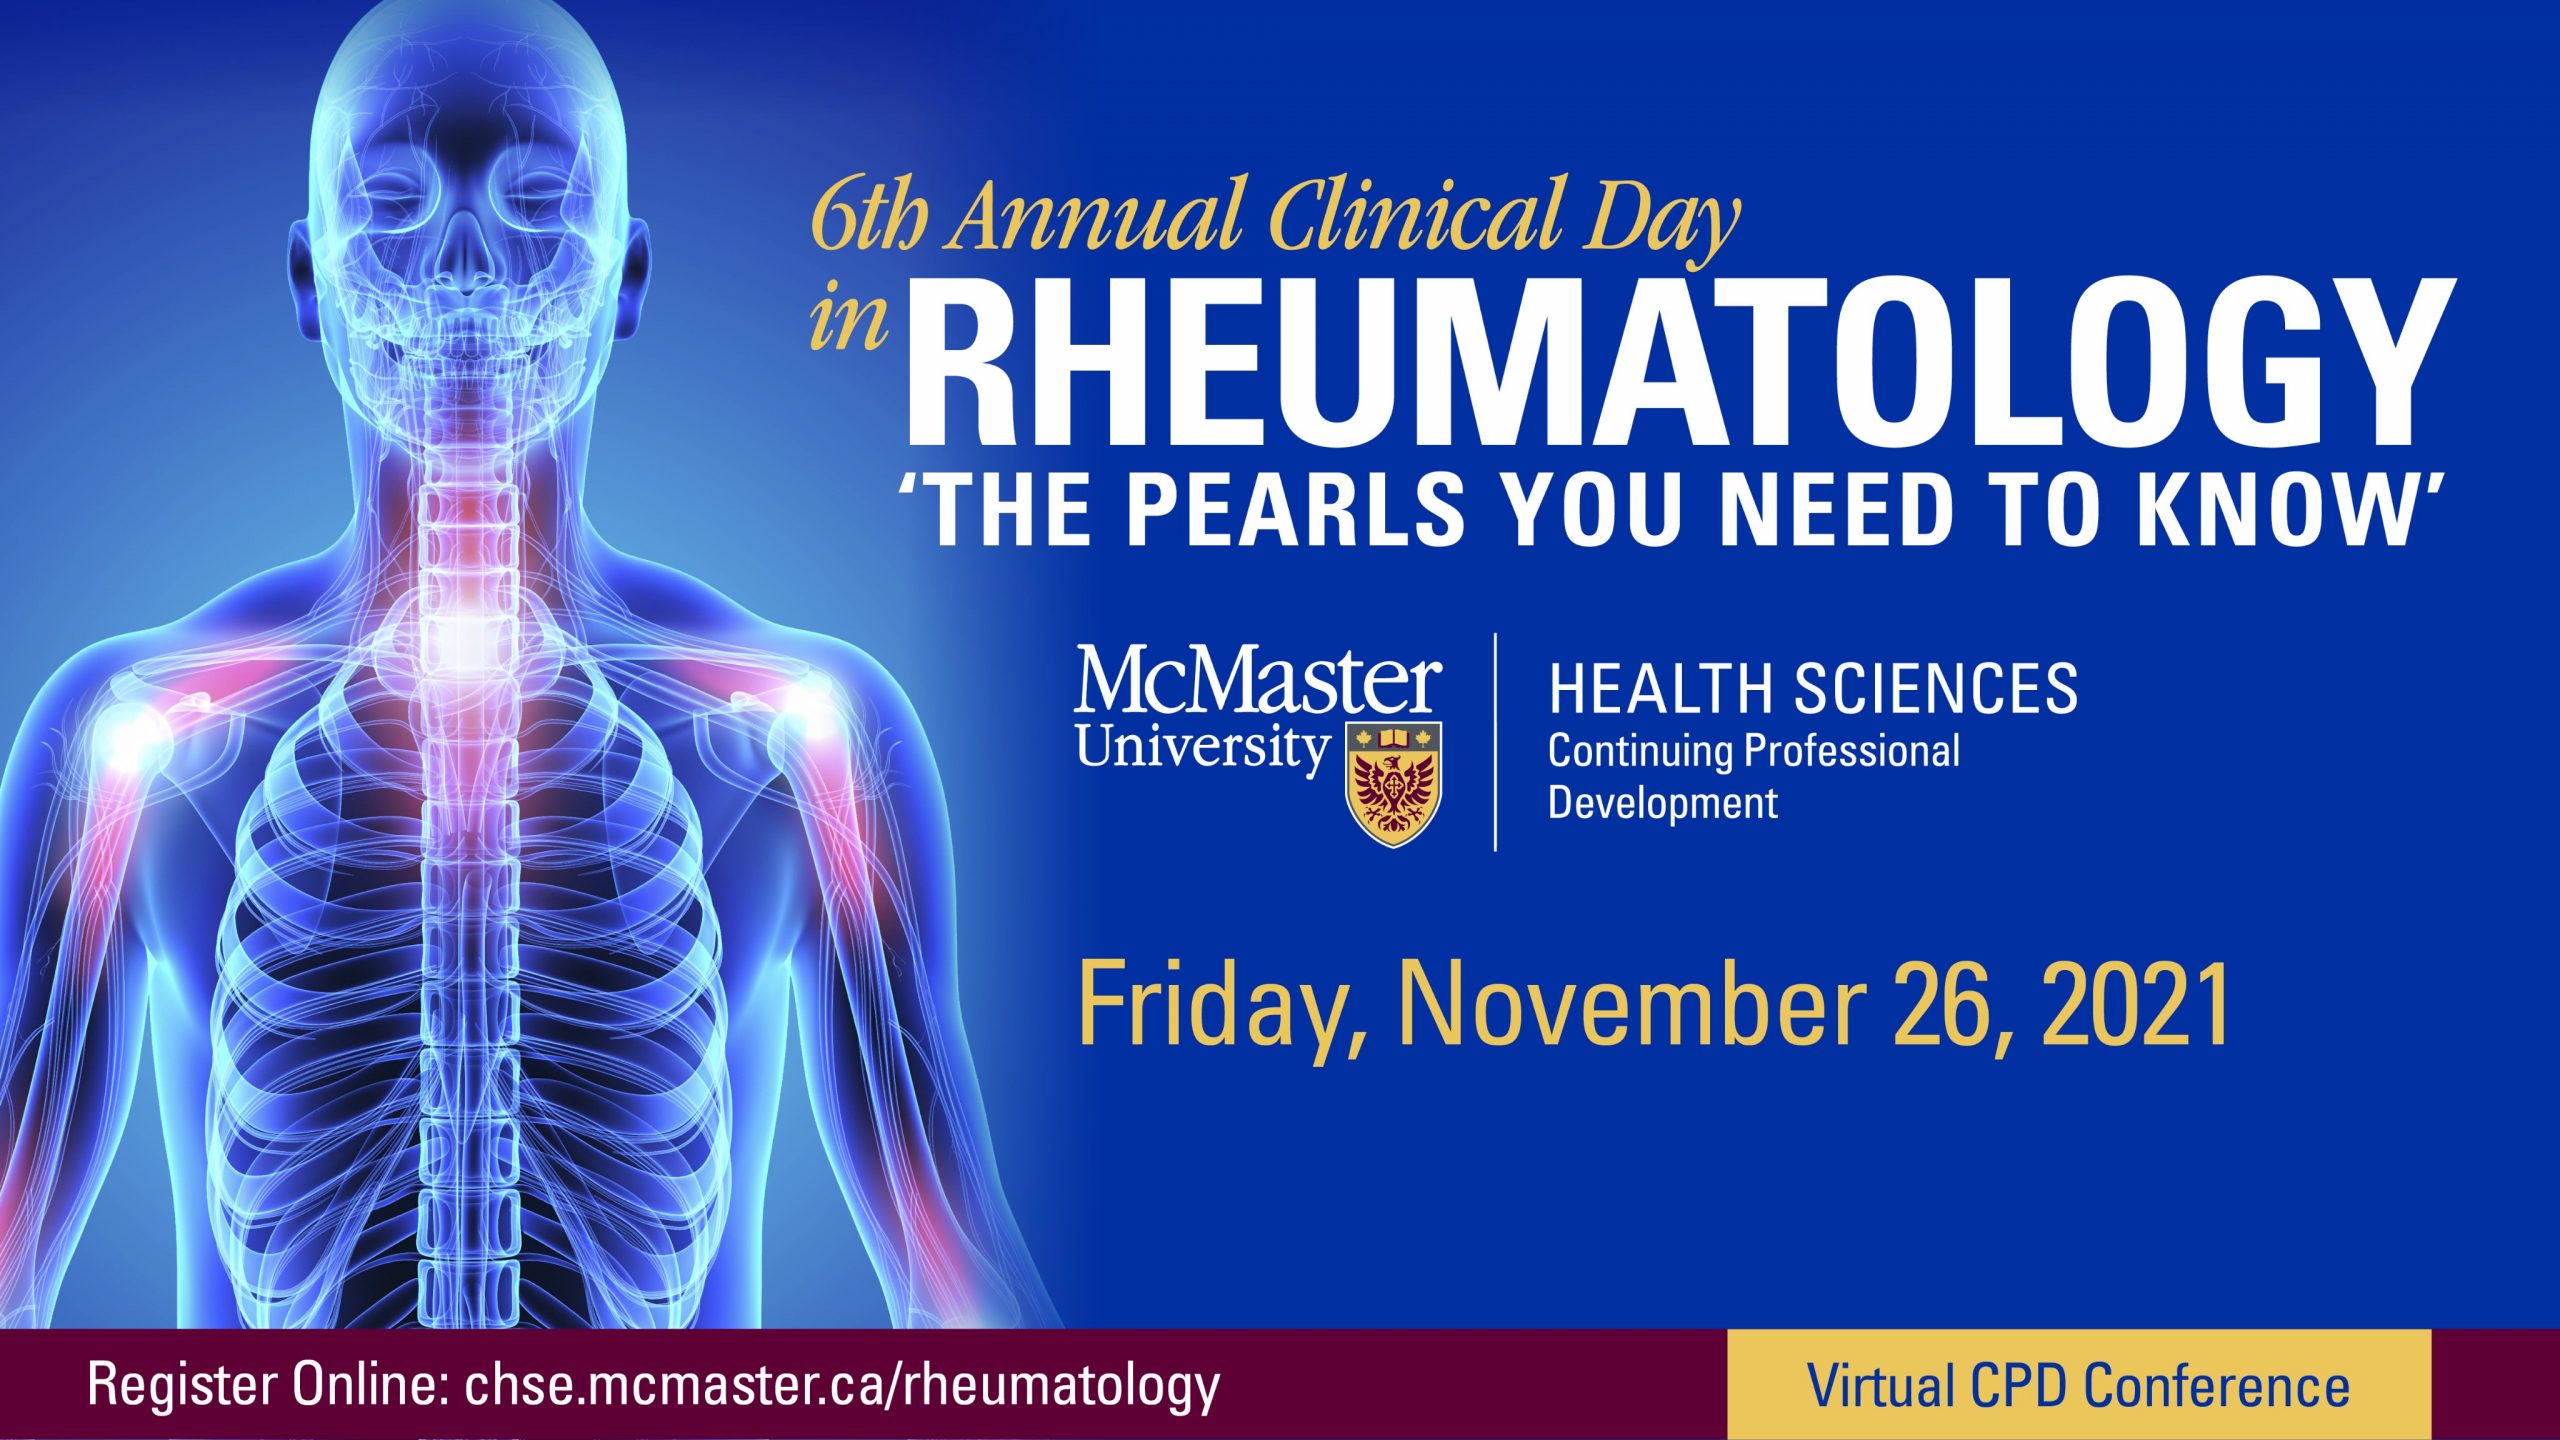 McMaster University 6th Annual Clinical Day in Rheumatology 2021